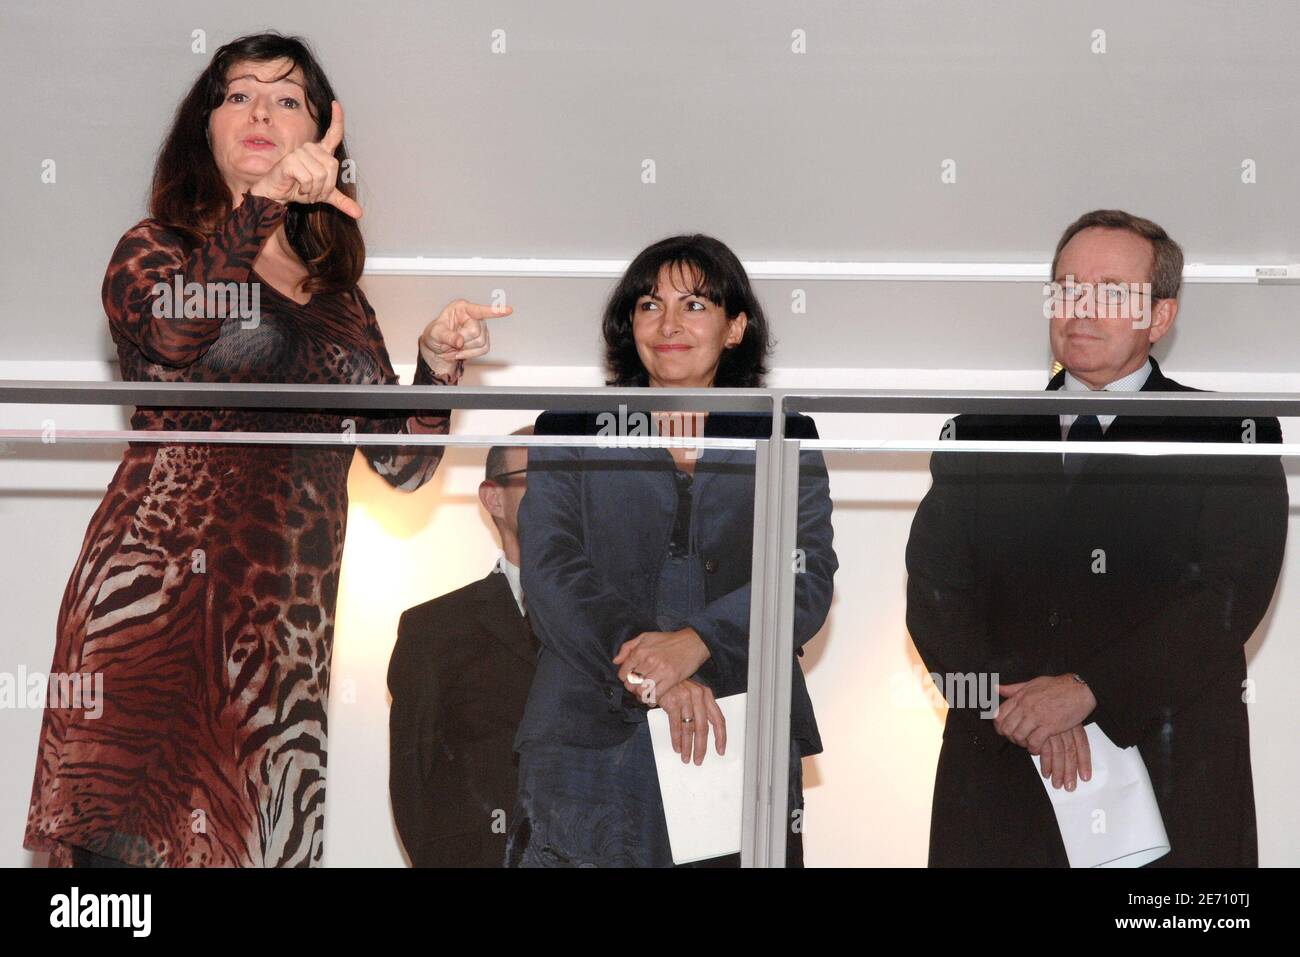 Culture minister Renaud Donnedieu de Vabres, deaf-mute actress Emmanuelle Laborit and Paris socialist deputy mayor Anne Hidalgo attend the opening of the 'International Visual Theatre' centre in Paris, France, on January 17, 2007. Photo by Nicolas Khayat/ABACAPRESS.COM Stock Photo